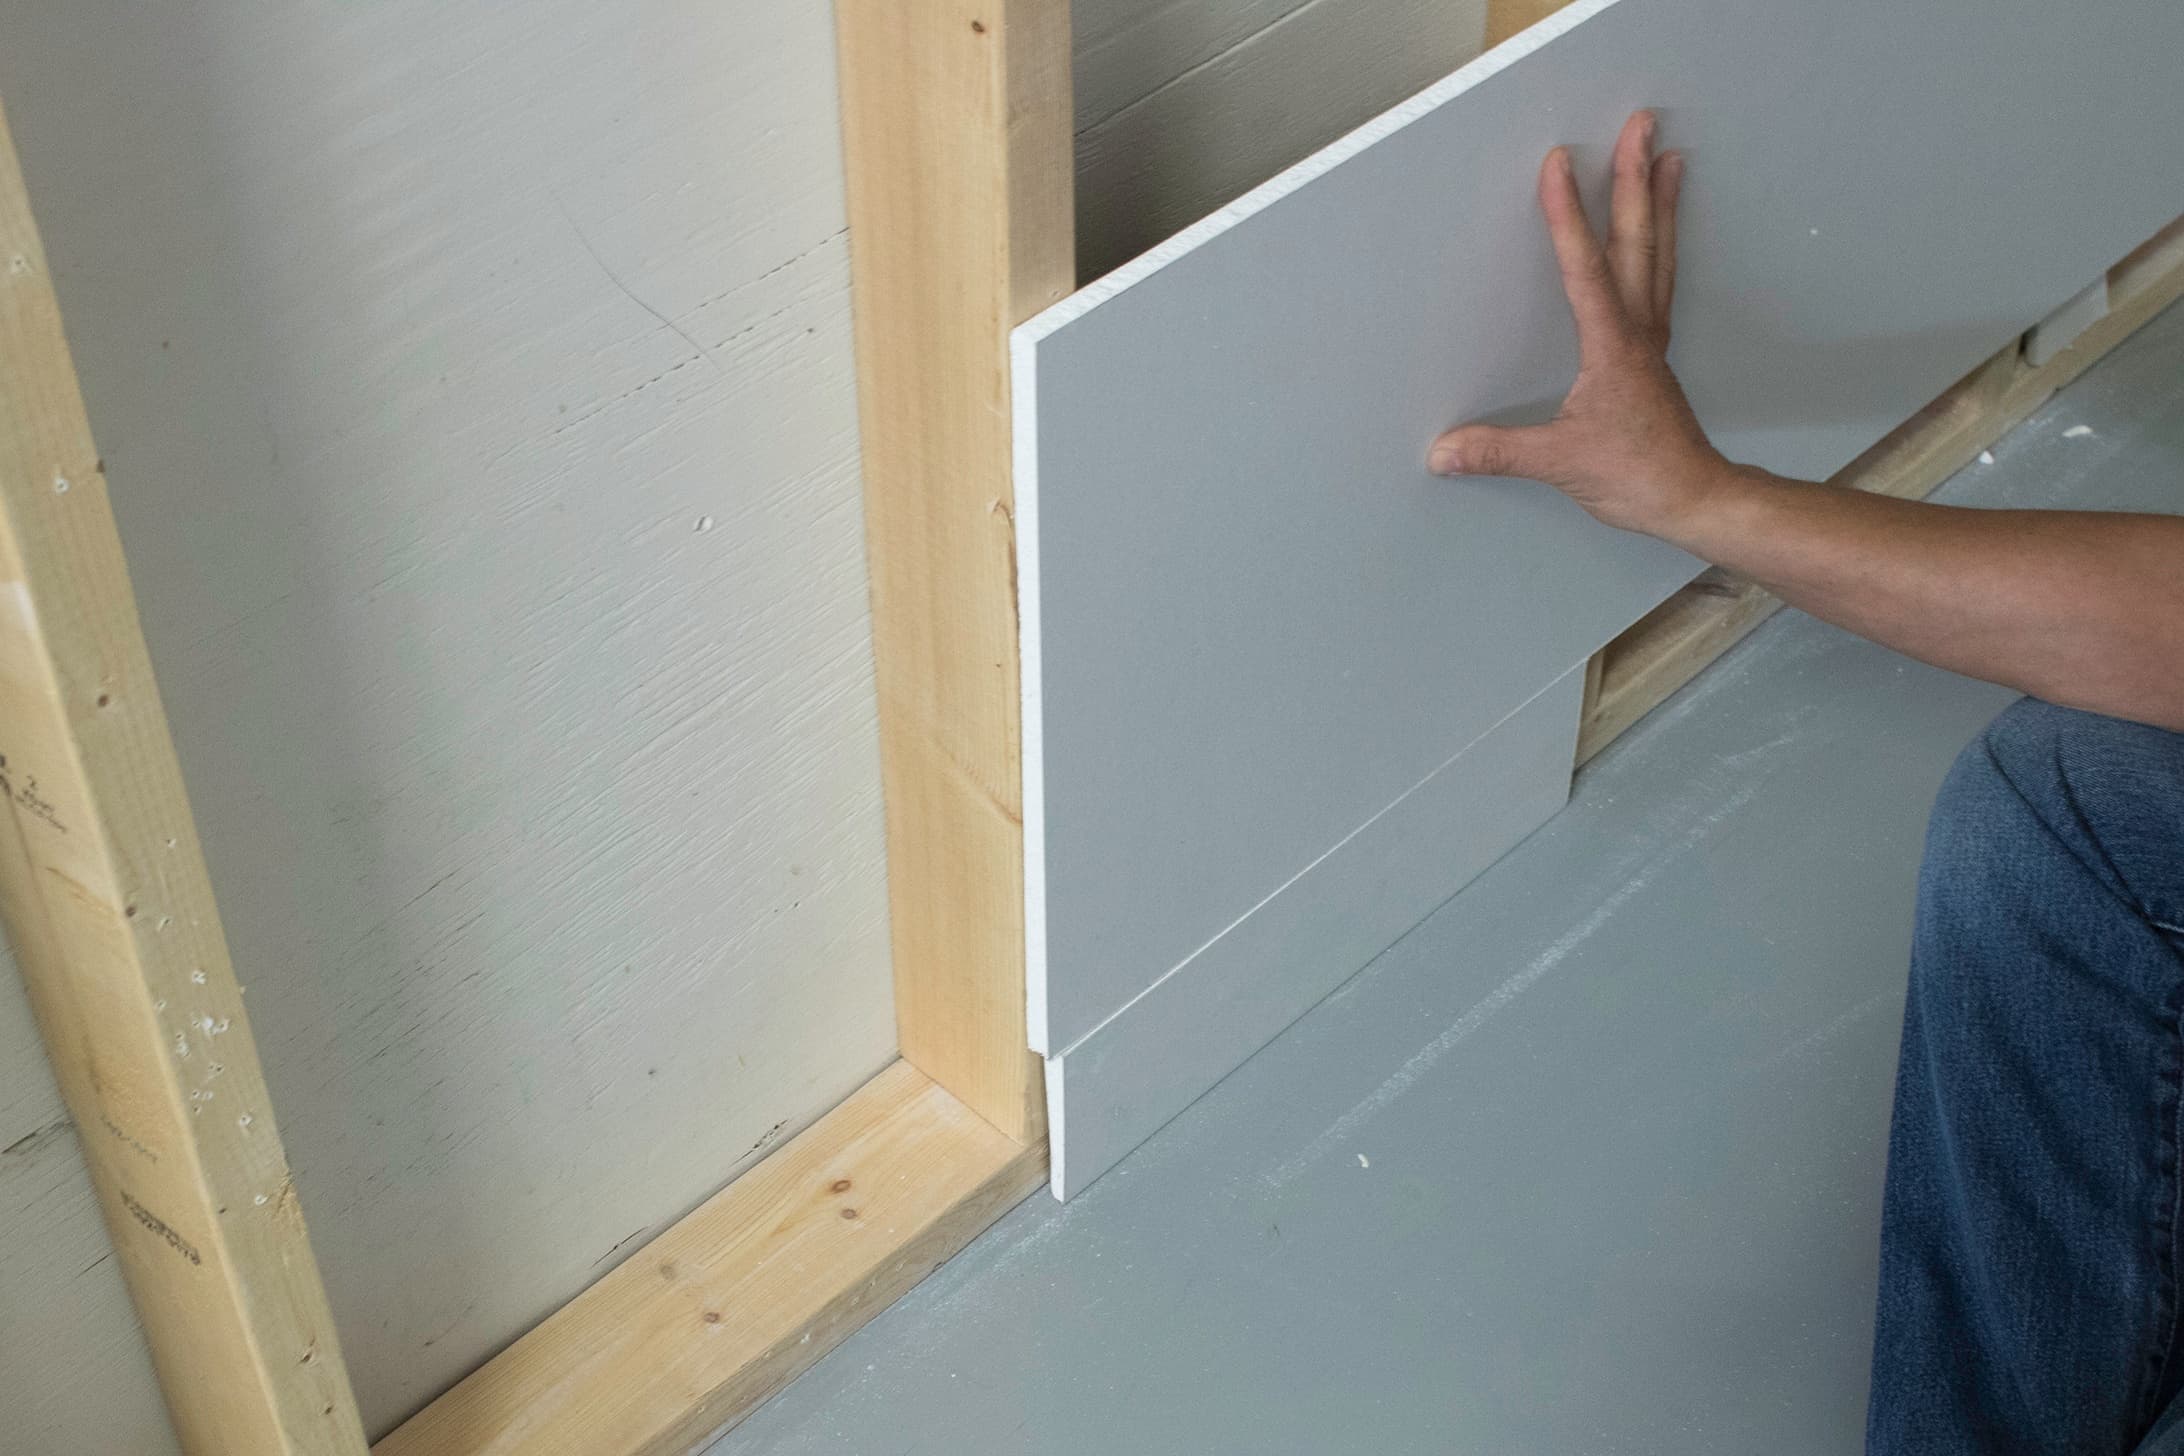 Once baseboard height is determine, take a scrap piece of drywall to act as a guide when installing the drywall to ensure adequate room for baseboard.